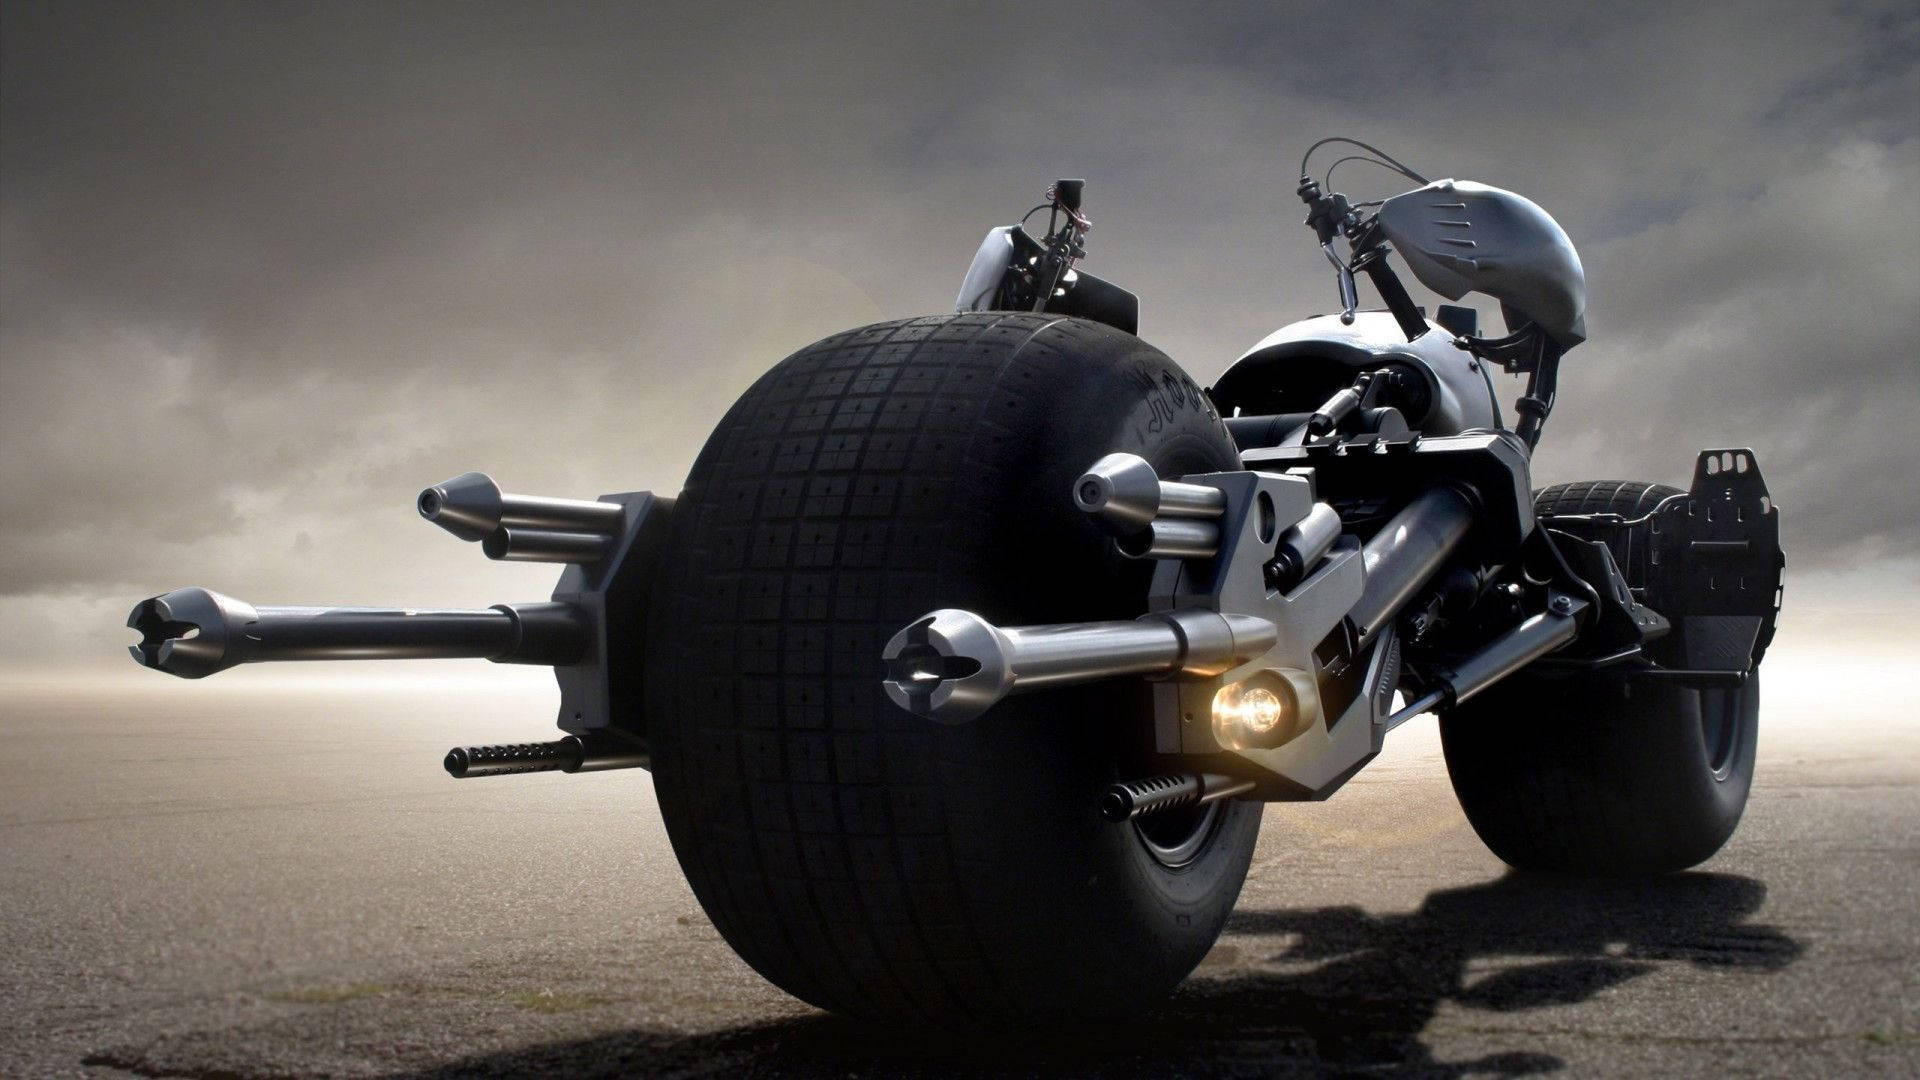 Batmobile Motorcycle In The Road Background